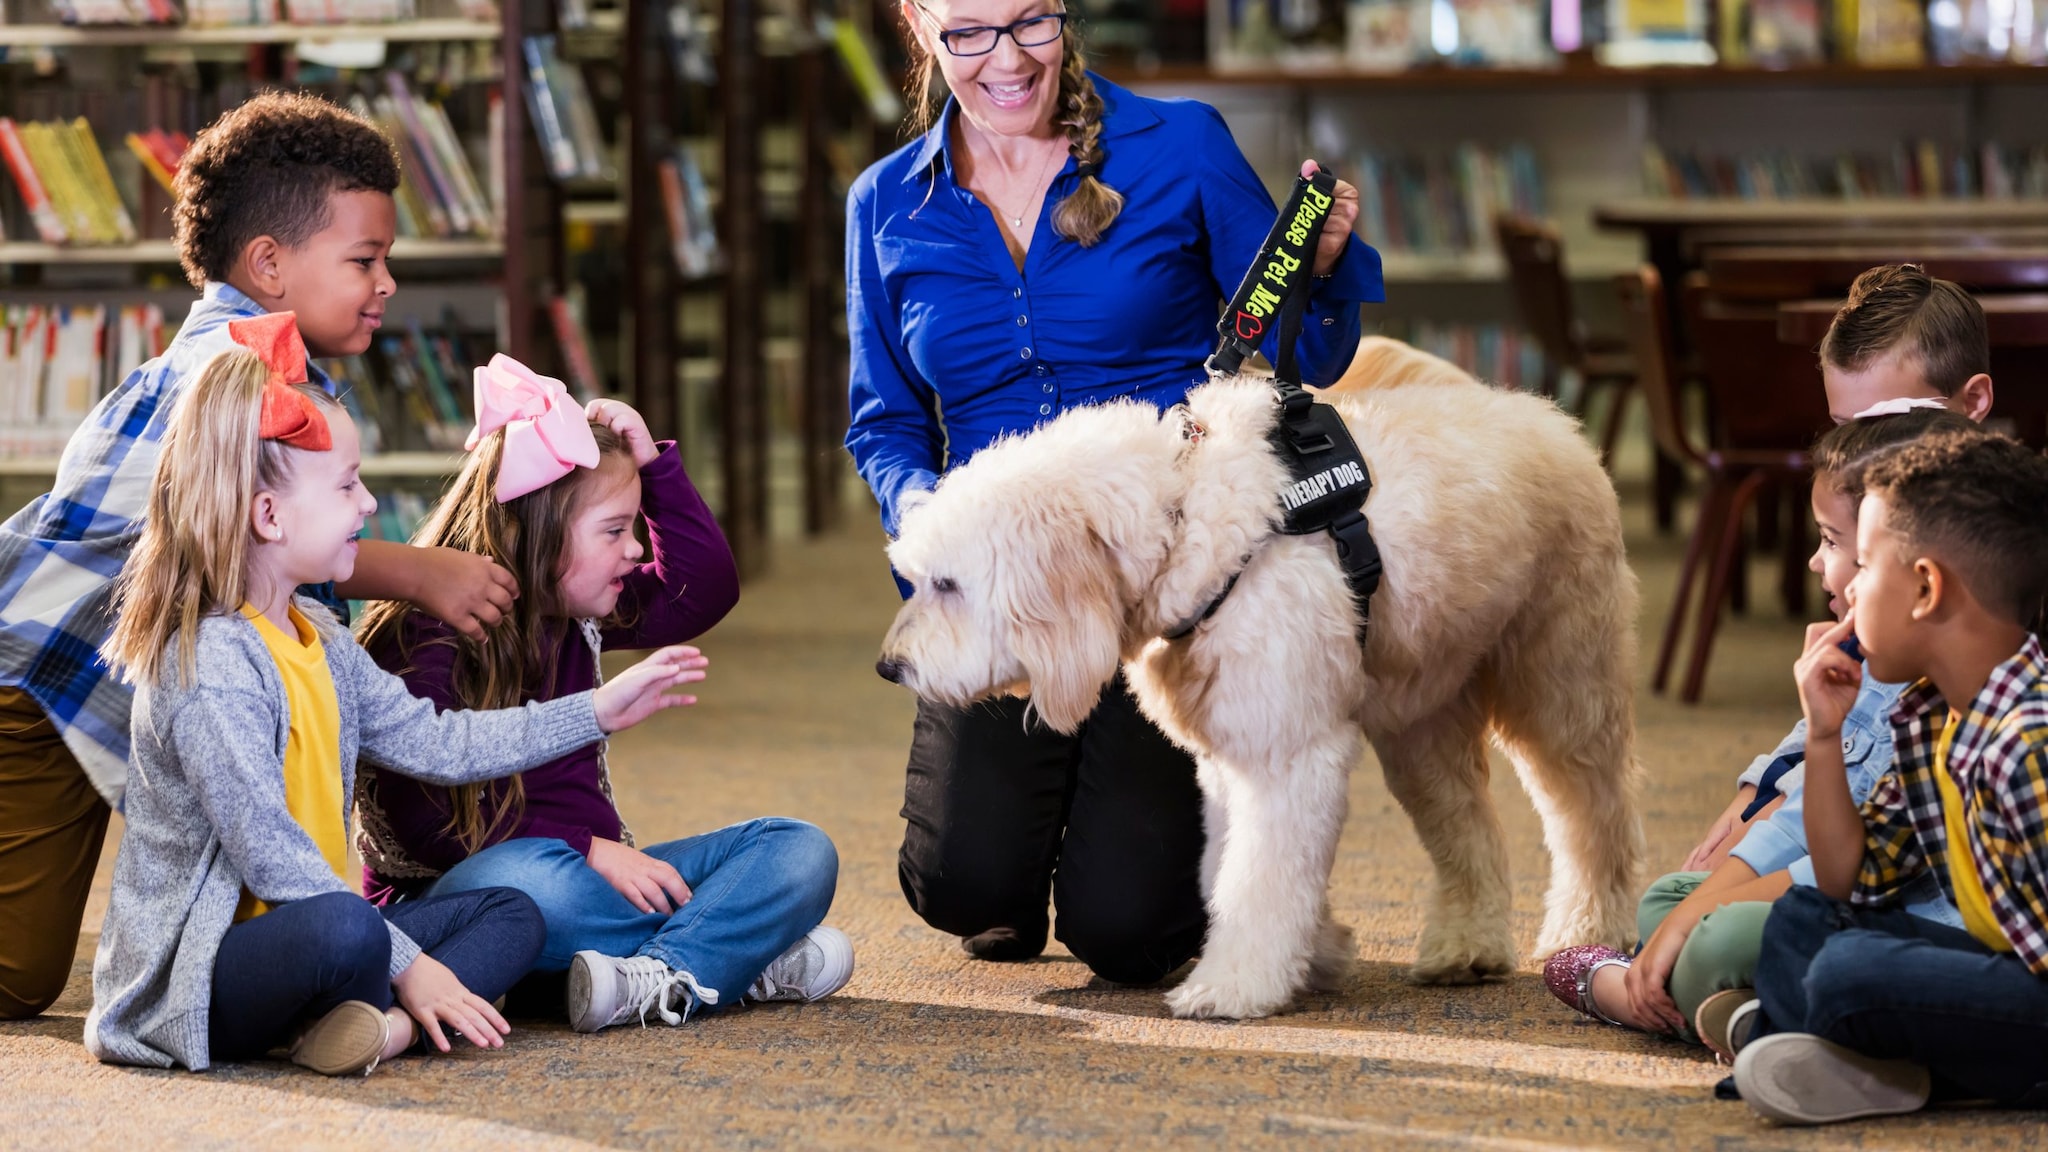 A therapy dog and its handler visit children in a school library